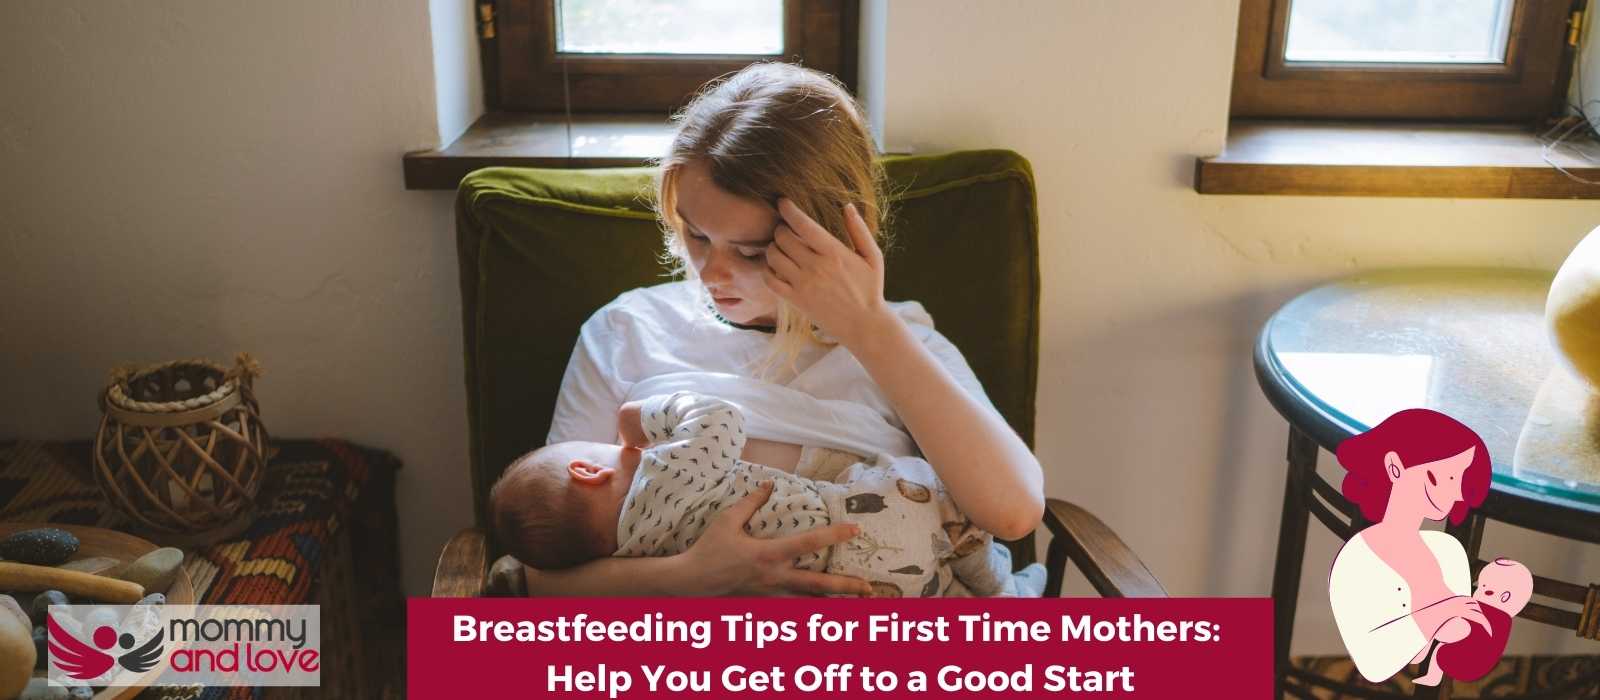 Breastfeeding Tips for First Time Mothers Help You Get Off to a Good Start